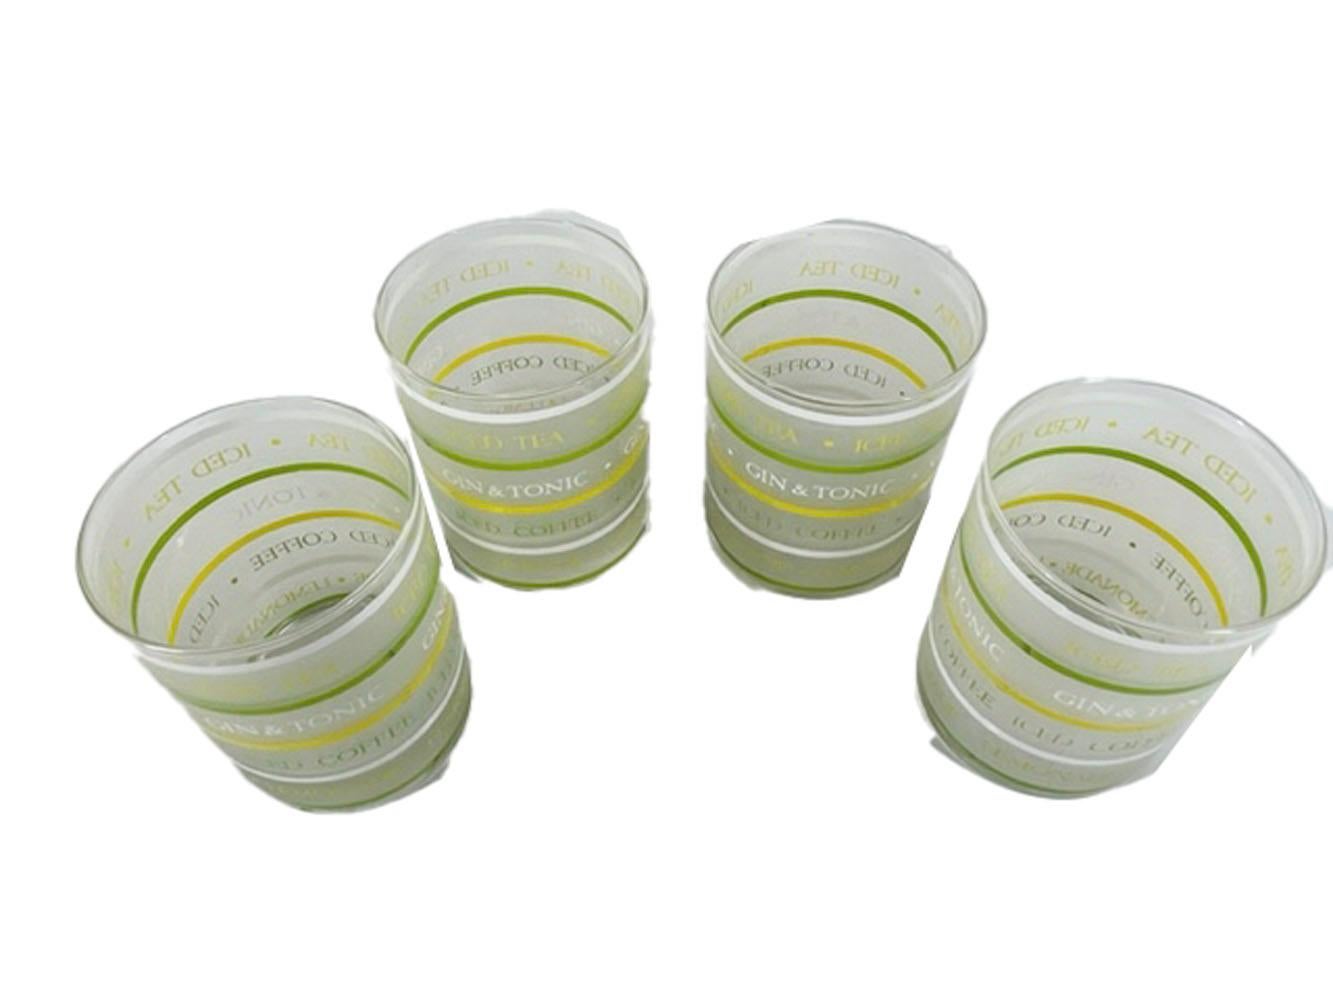 Four mid-century rocks glasses by Culver, LTD in the Gin & Tonic pattern having horizontal bands in green, white and yellow with the drink names 